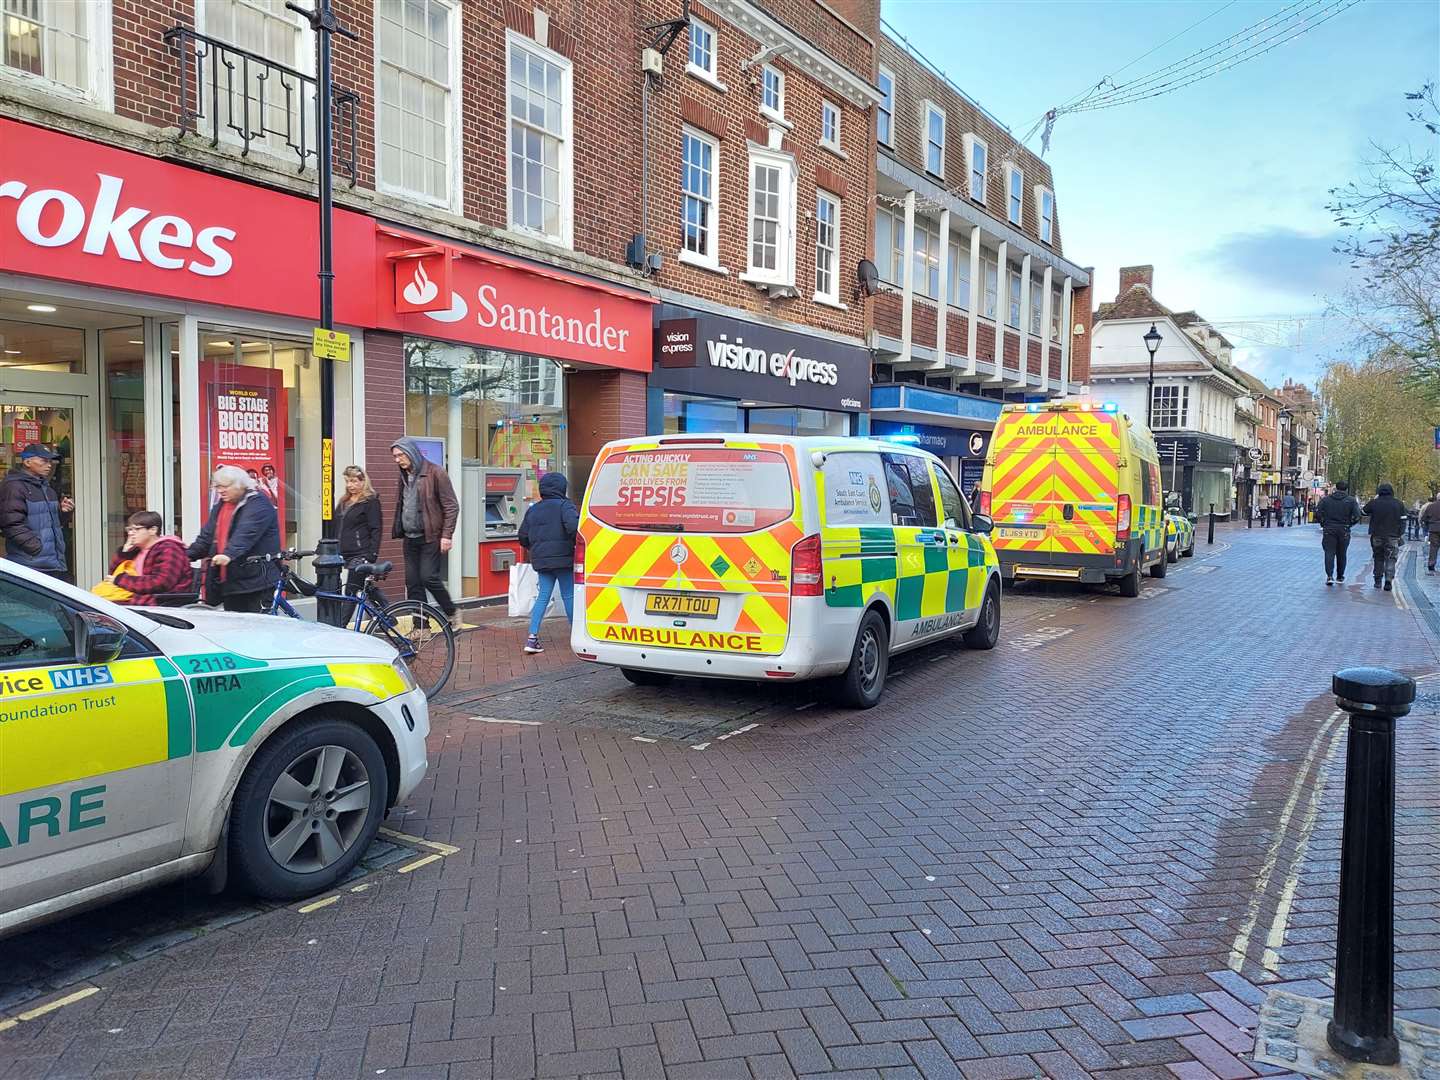 Four ambulance service vehicles and a police car have been called